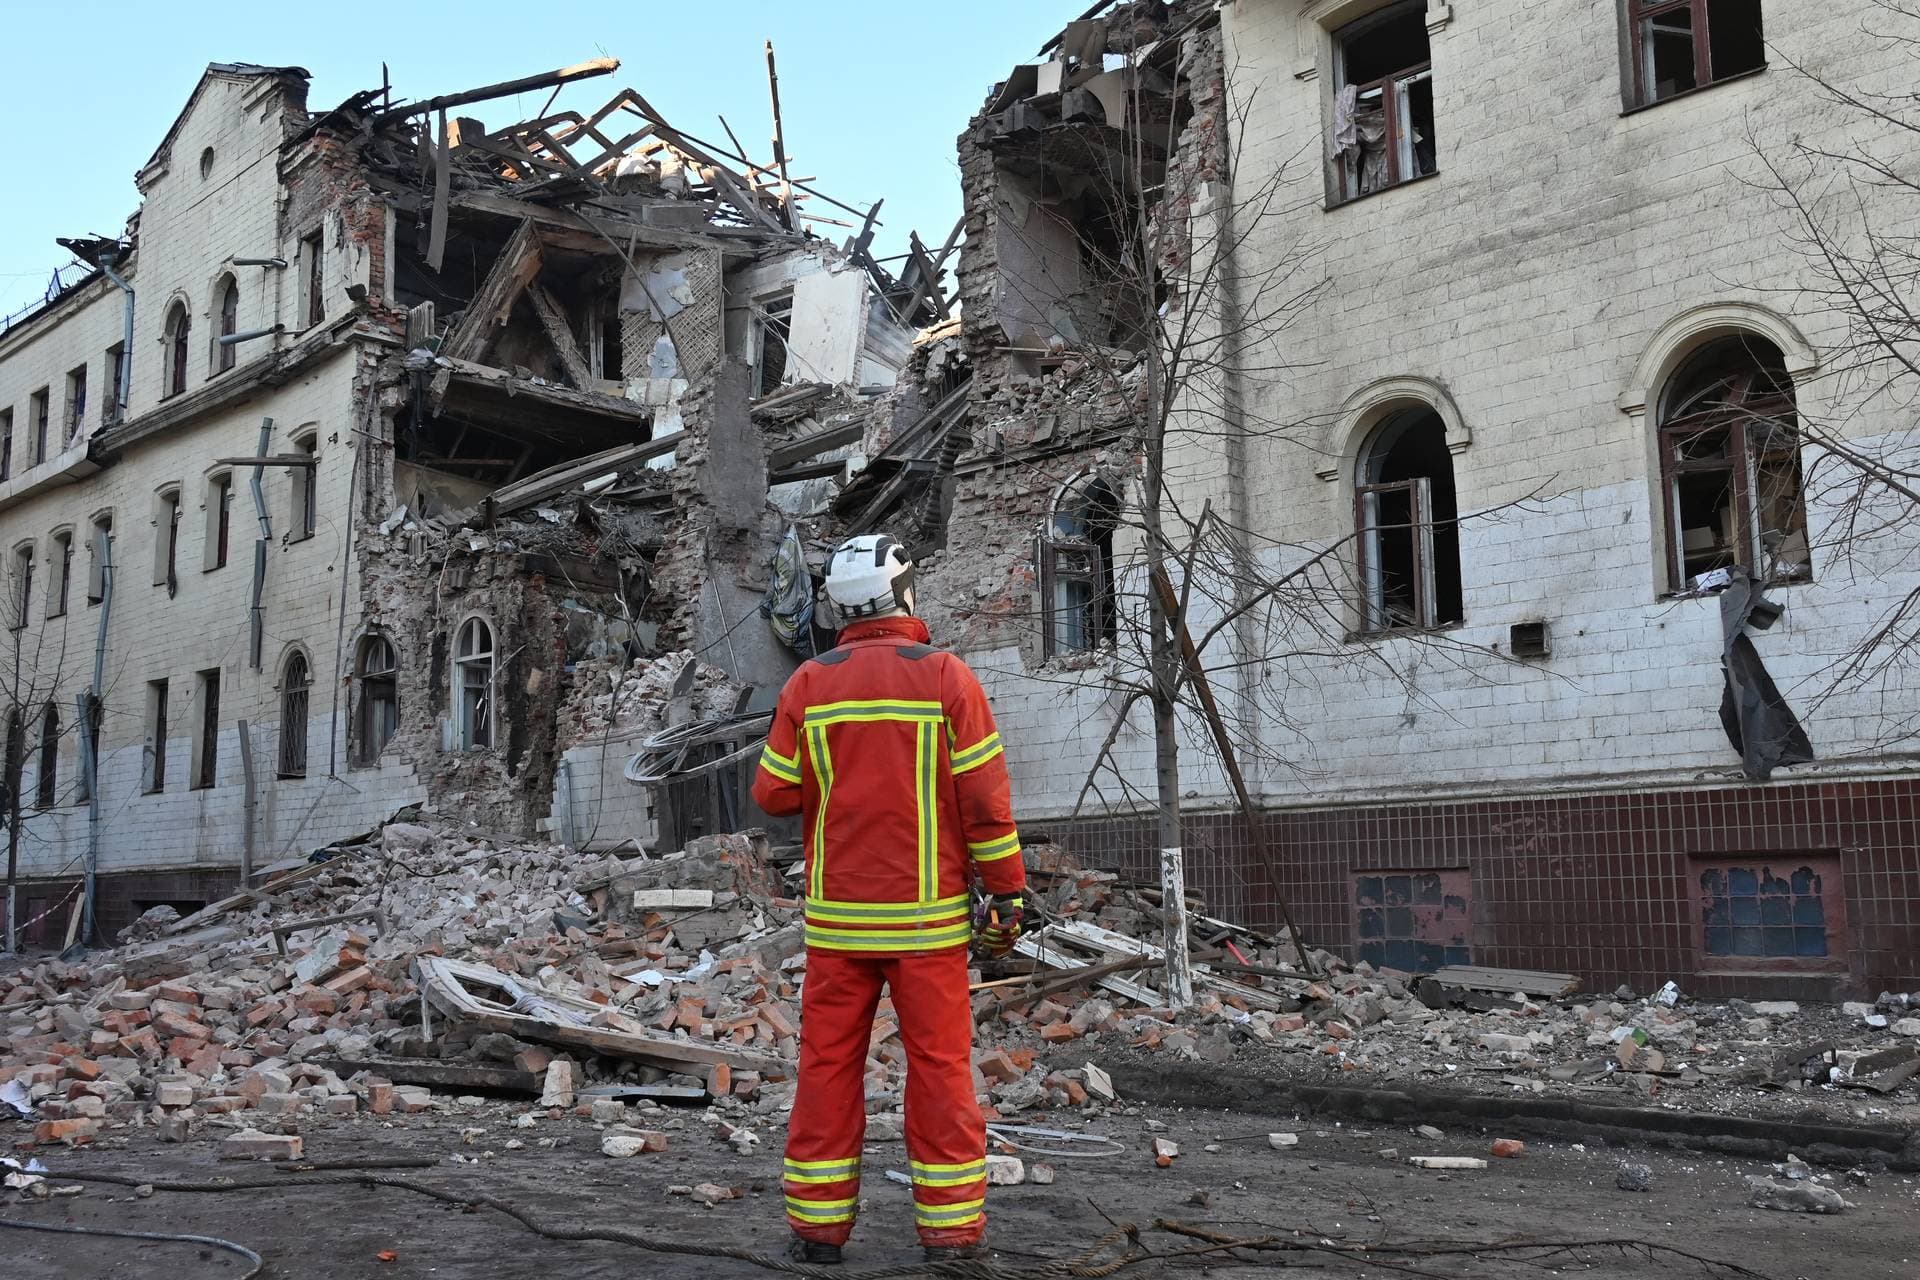 A rescue worker stands next to a residential building partially destroyed as a result of a missile attack in Kharkiv